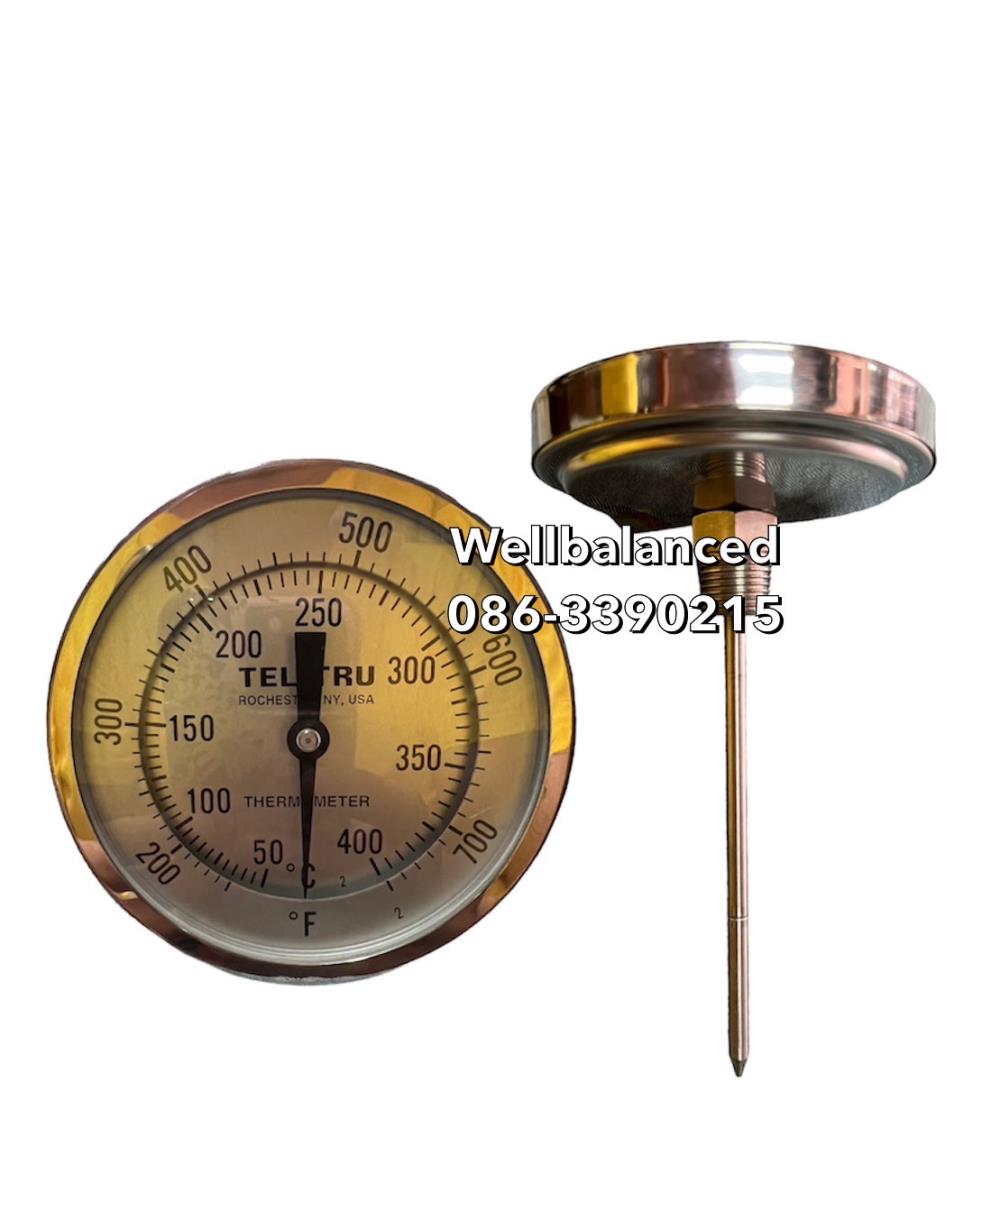 Thermometer Gauge (Temp gauge) 4" 50- 400 C,Thermometer Gauge (Temp gauge) 4" 50- 400 C,Thermometer Gauge (Temp gauge) 4" 50- 400 C,Instruments and Controls/Gauges